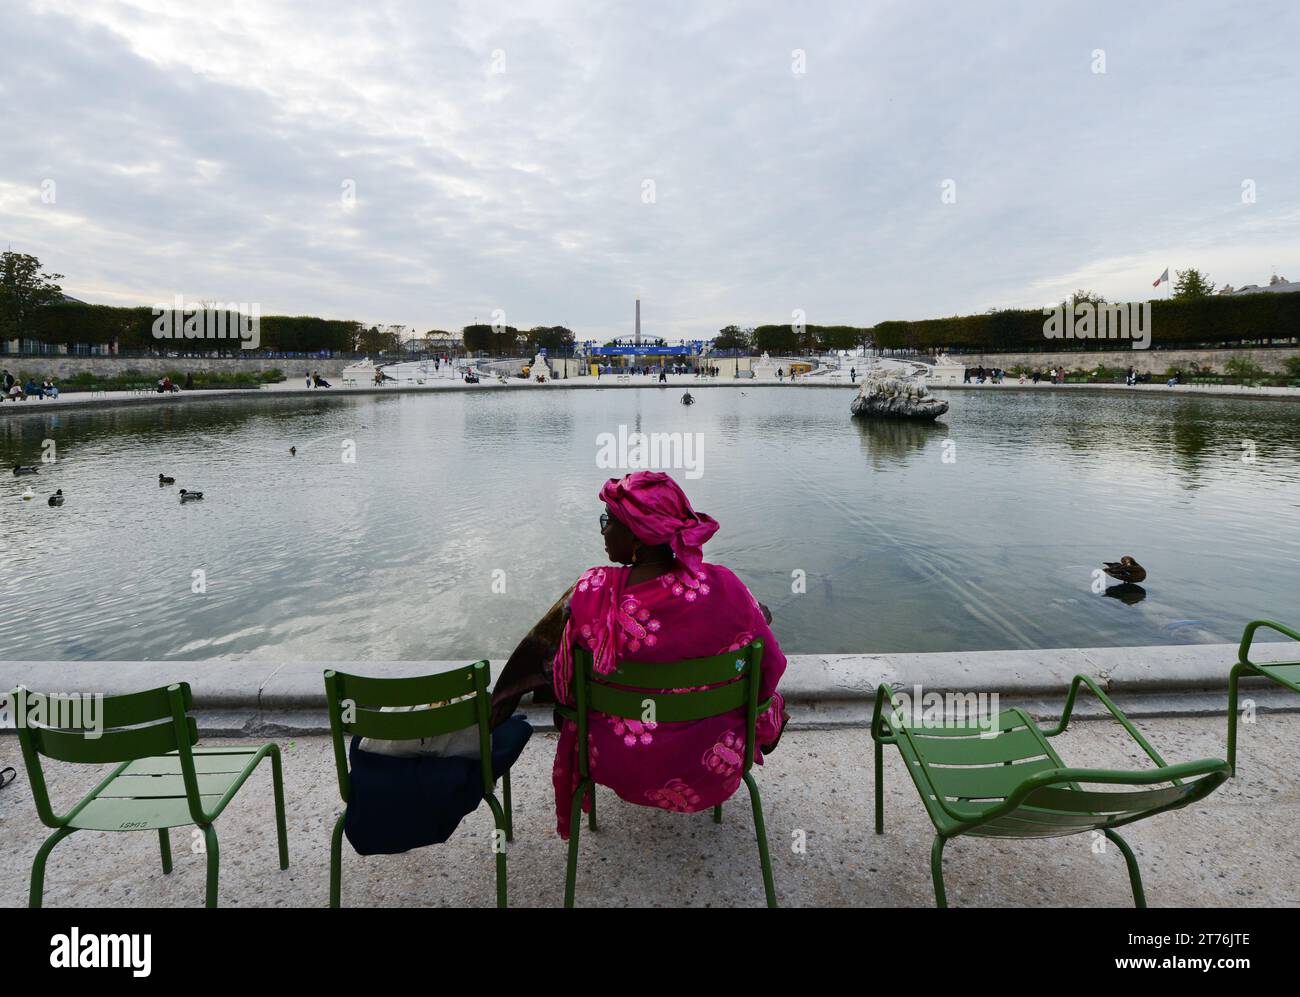 The Bassin Octogonal at the Tuileries Garden in Paris, France. Stock Photo